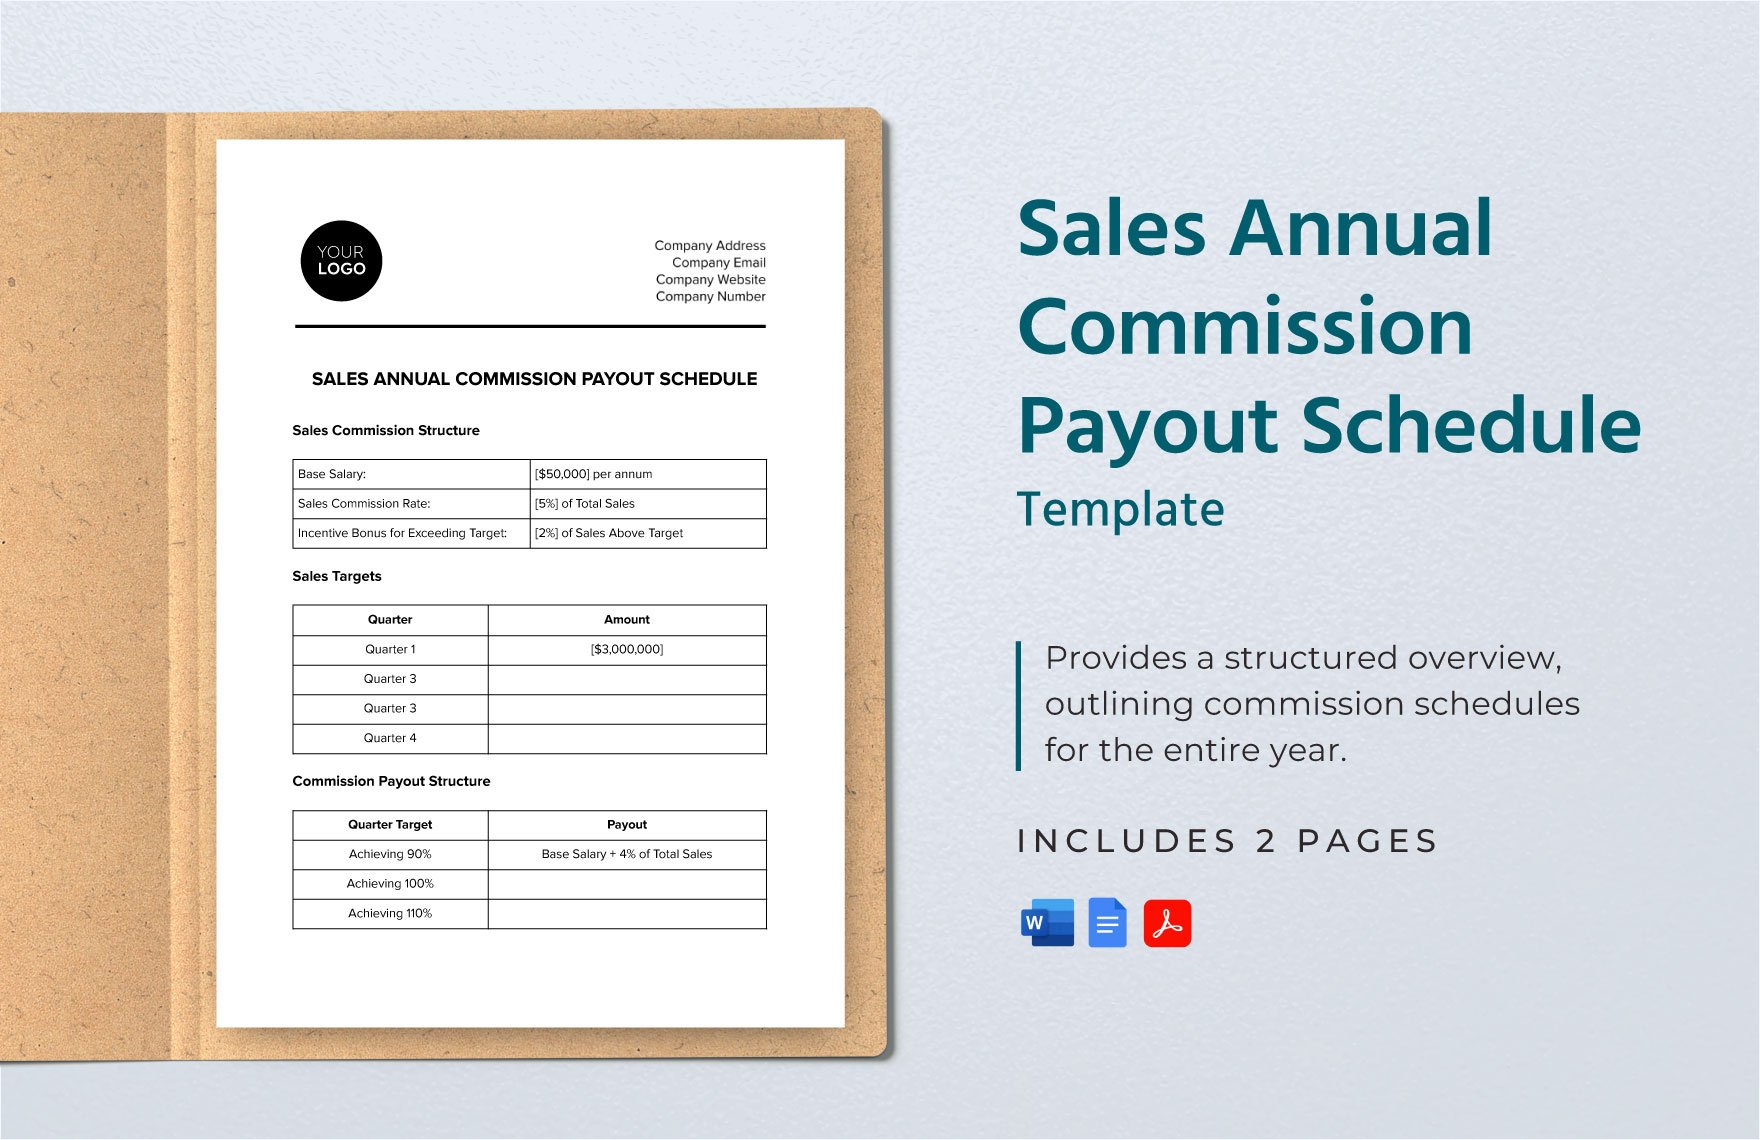 Sales Annual Commission Payout Schedule Template in Word, Google Docs, PDF